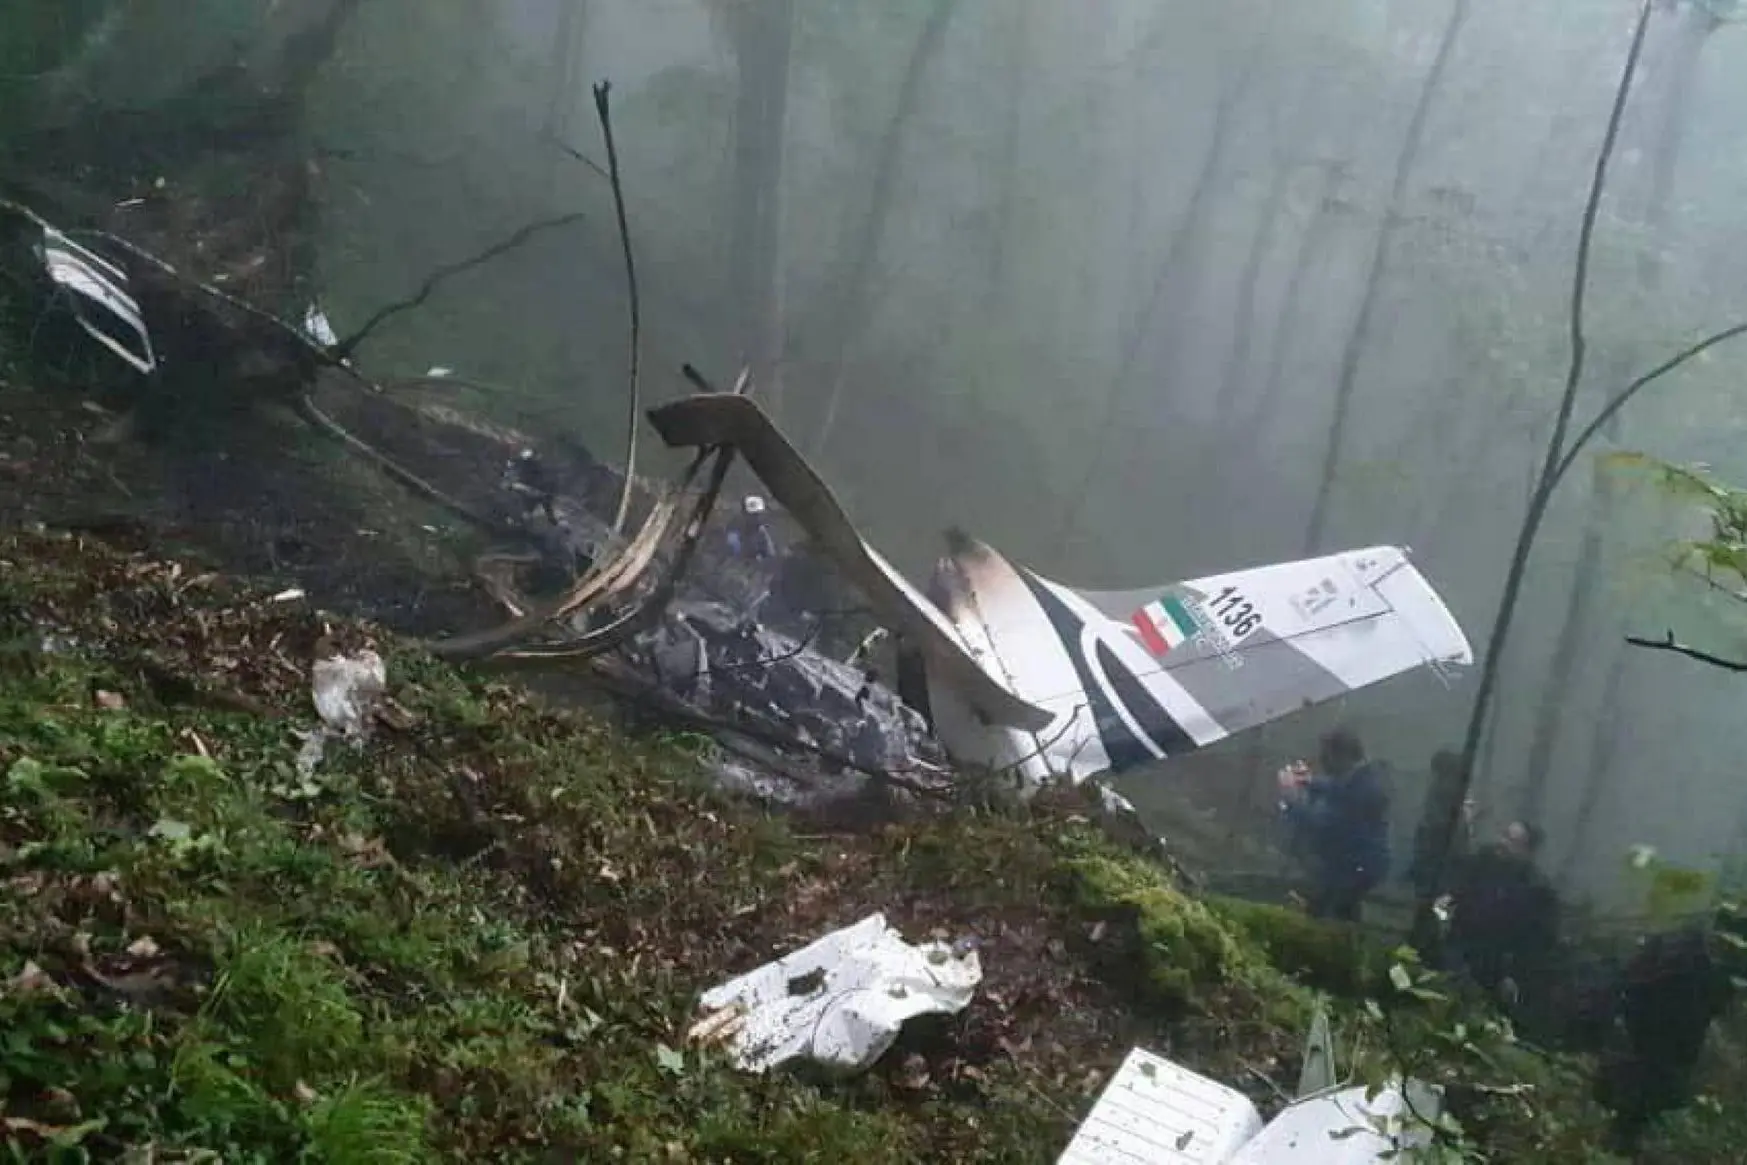 epa11354652 A handout photo made available by Iranian state TV (IRIB) shows the wreckage of a helicopter carrying Iranian President Ebrahim Raisi in the mountainous Varzaghan area, Iran, 20 May 2024. According to Iranian state media, President Raisi, Foreign Minister Hossein Amir Abdolahian and several others were killed in the crash. Raisi was returning after an inauguration ceremony of the joint Iran-Azerbaijan constructed Qiz-Qalasi dam at the Aras River. EPA/Iranian state TV (IRIB) HANDOUT EDITORIAL USE ONLY/NO SALES HANDOUT EDITORIAL USE ONLY/NO SALES